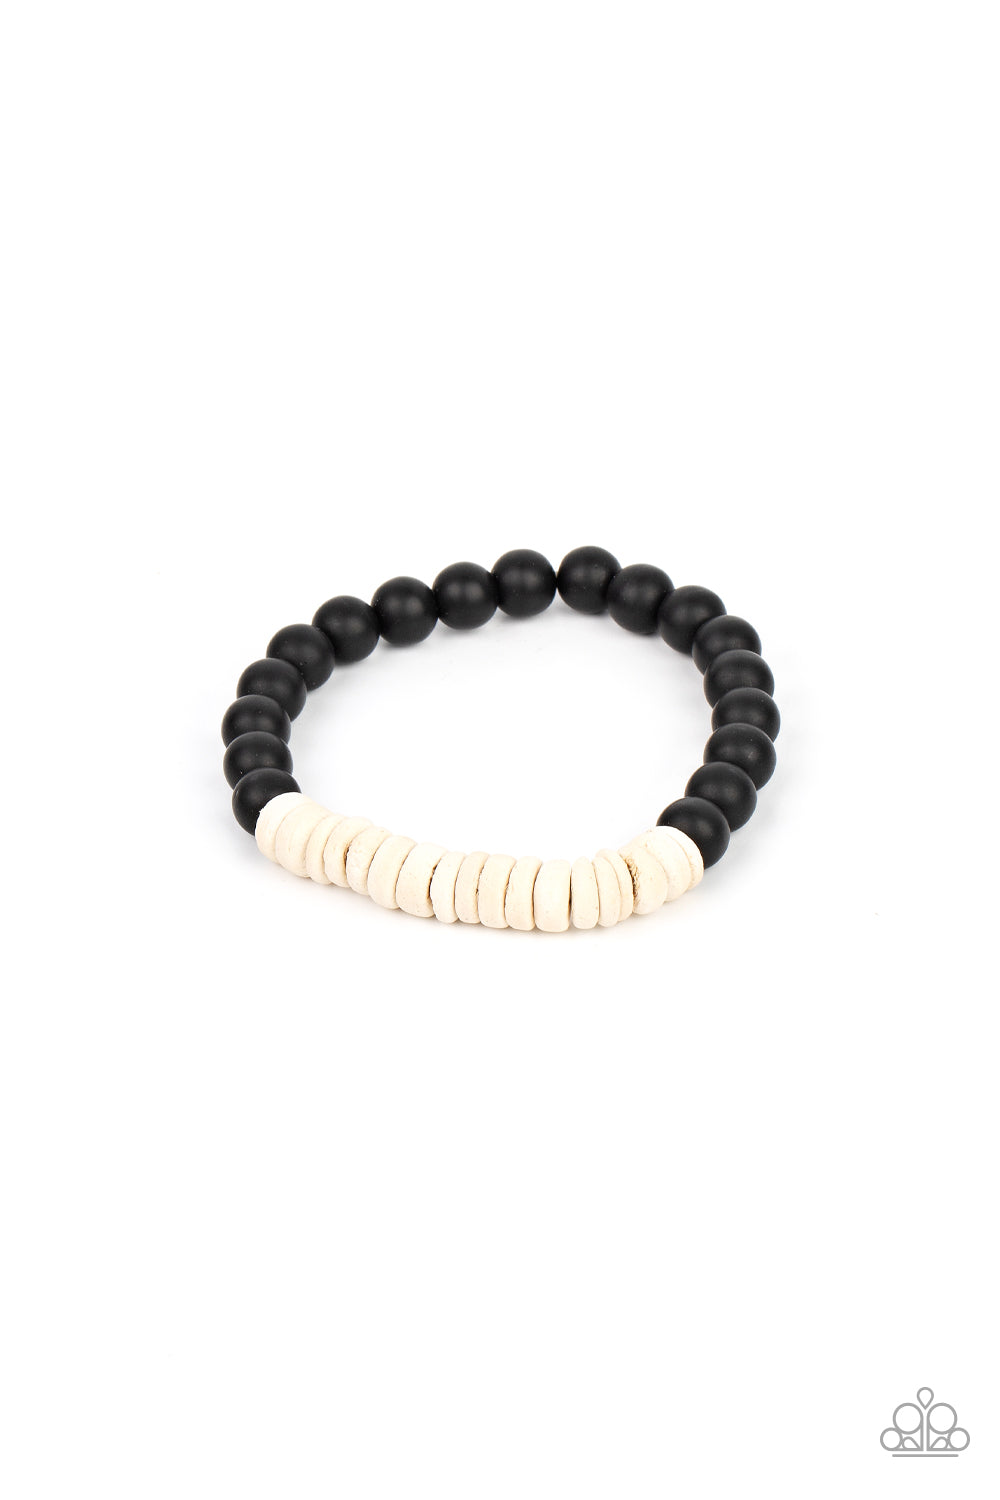 Paparazzi -  Recreational Remedy - White - White wooden discs and smooth black stone beads are threaded along stretchy bands around the wrist, resulting in an earthy combo.